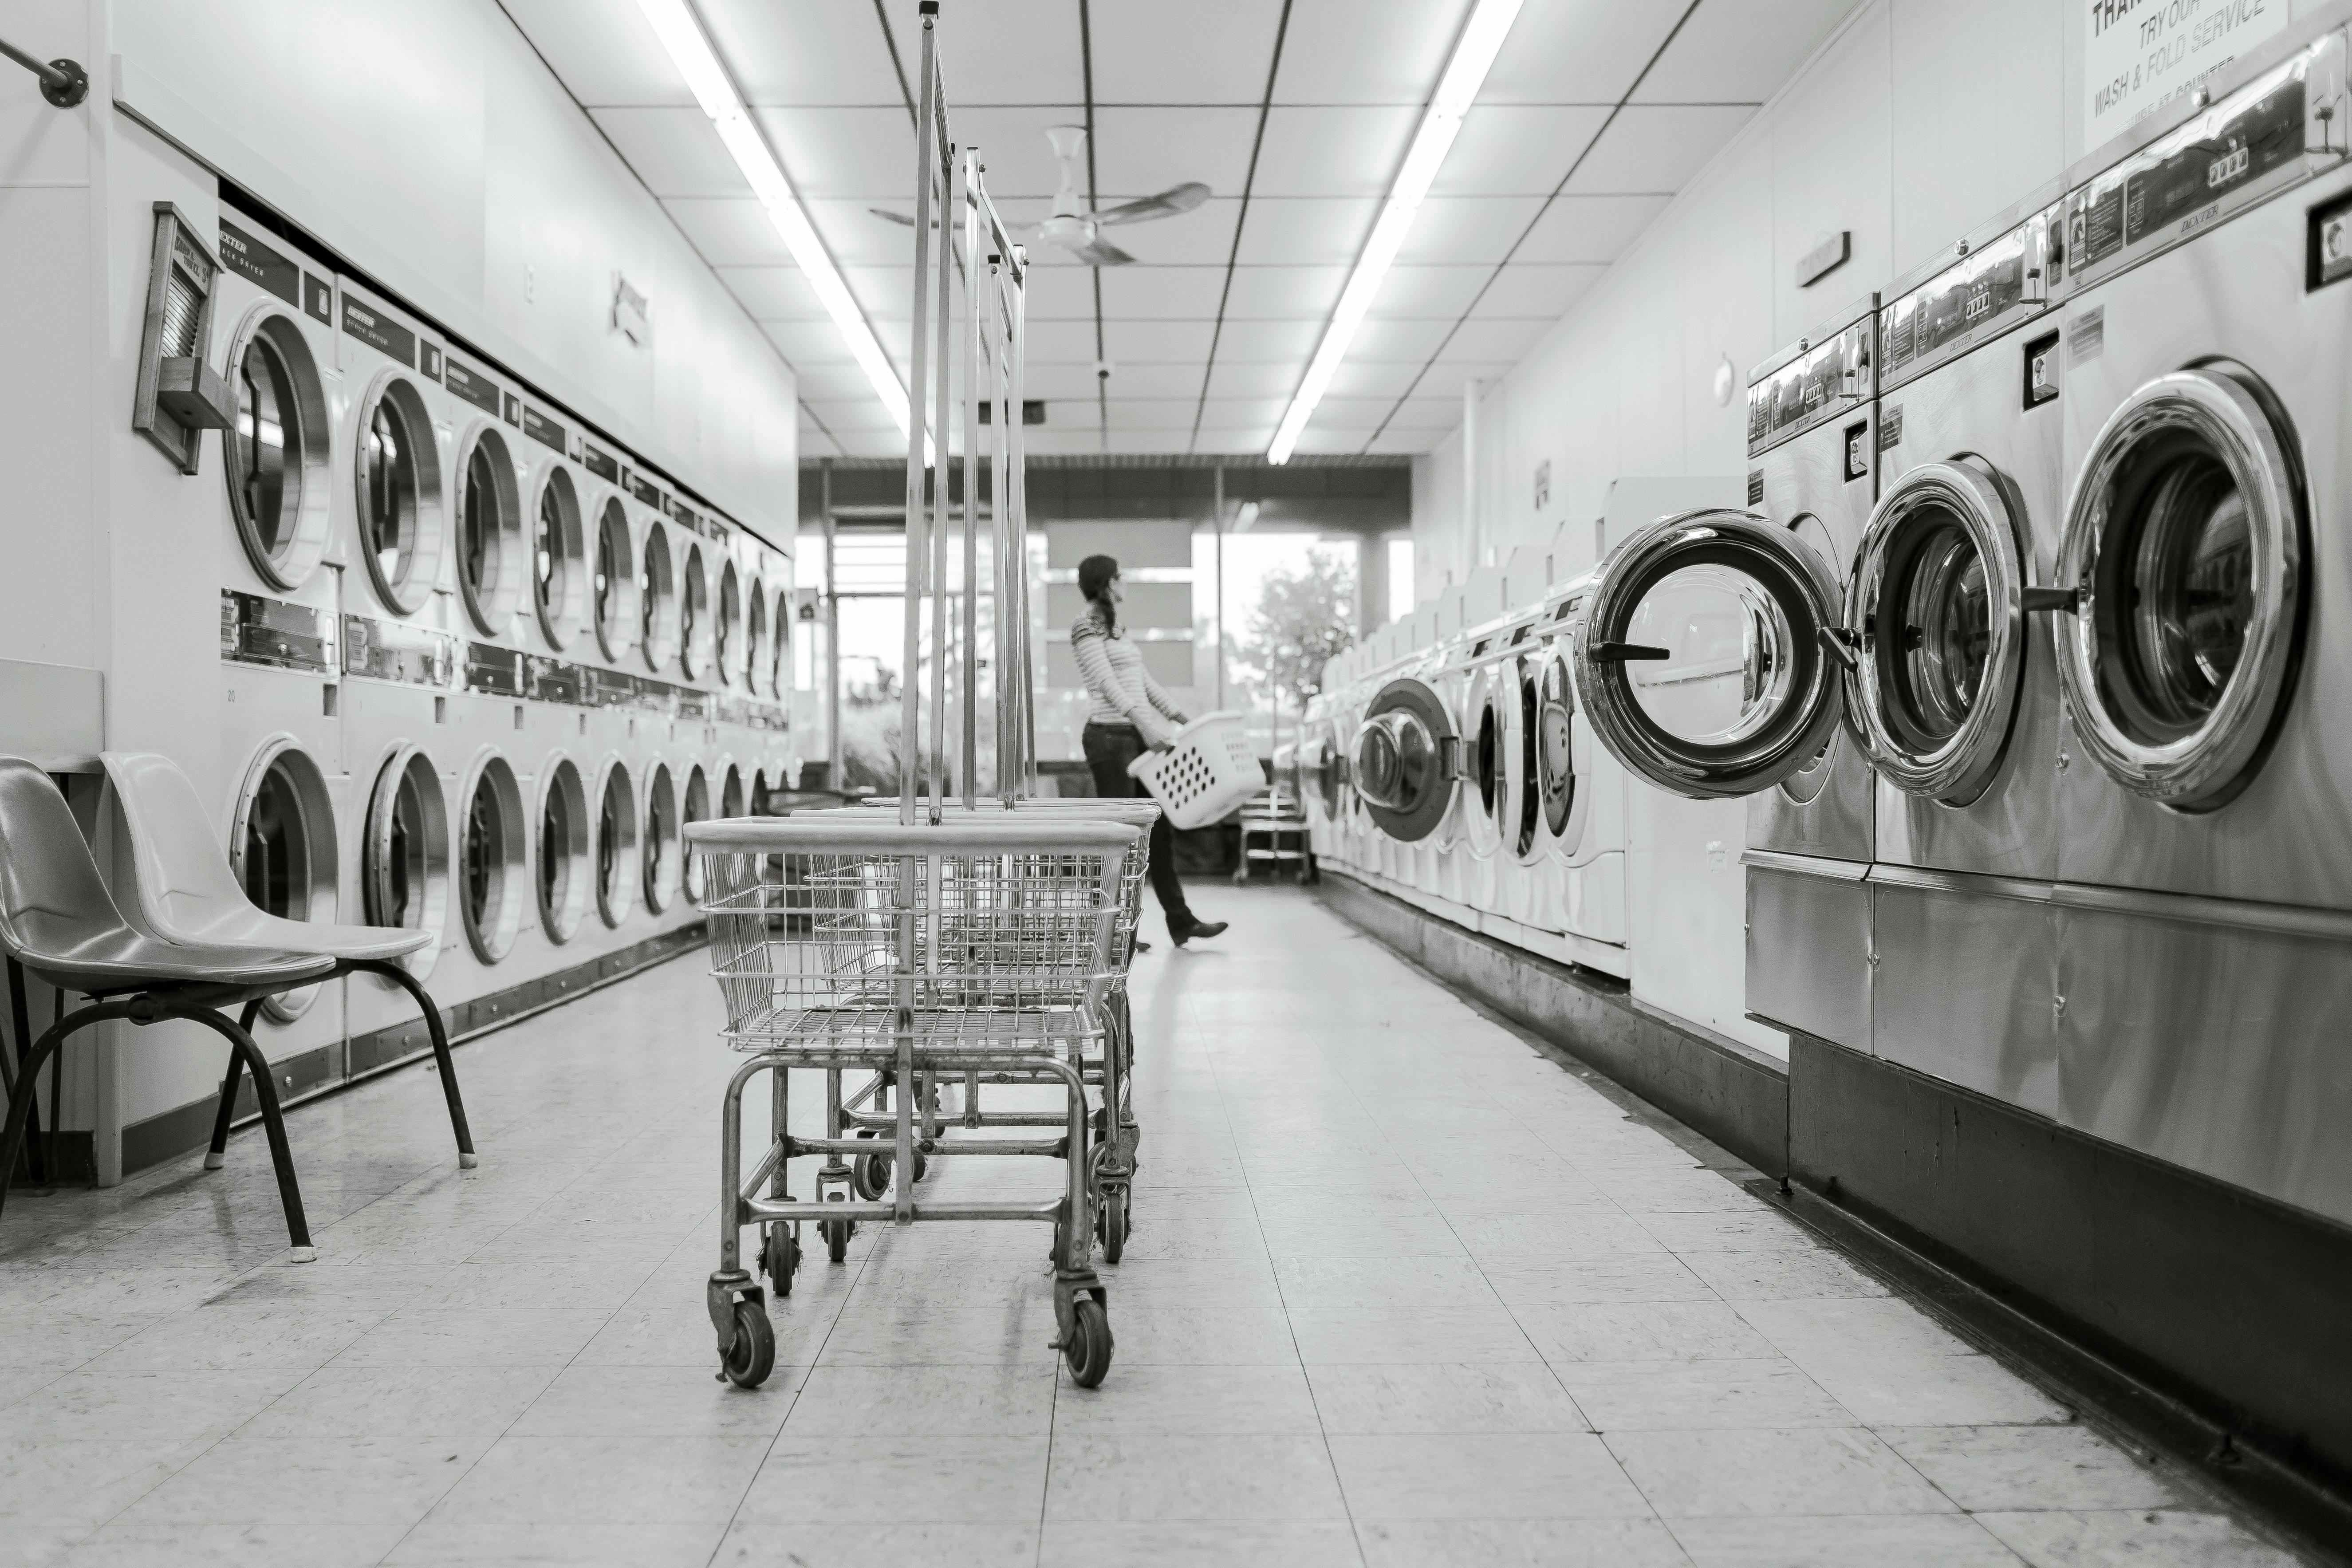 The inside of a laundromat | Source: Pexels